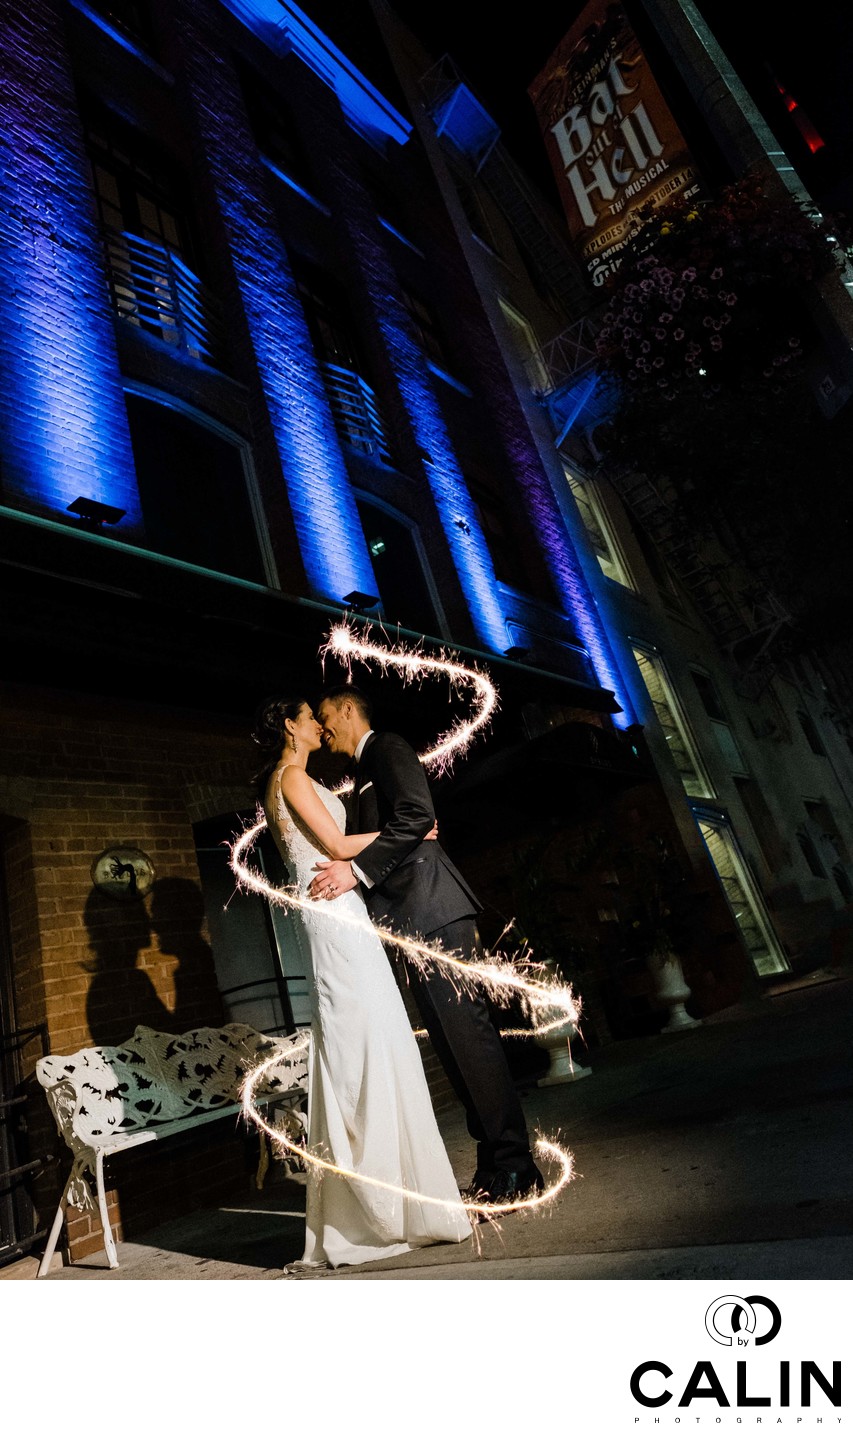 Sparkler Photography at Storys Building Wedding